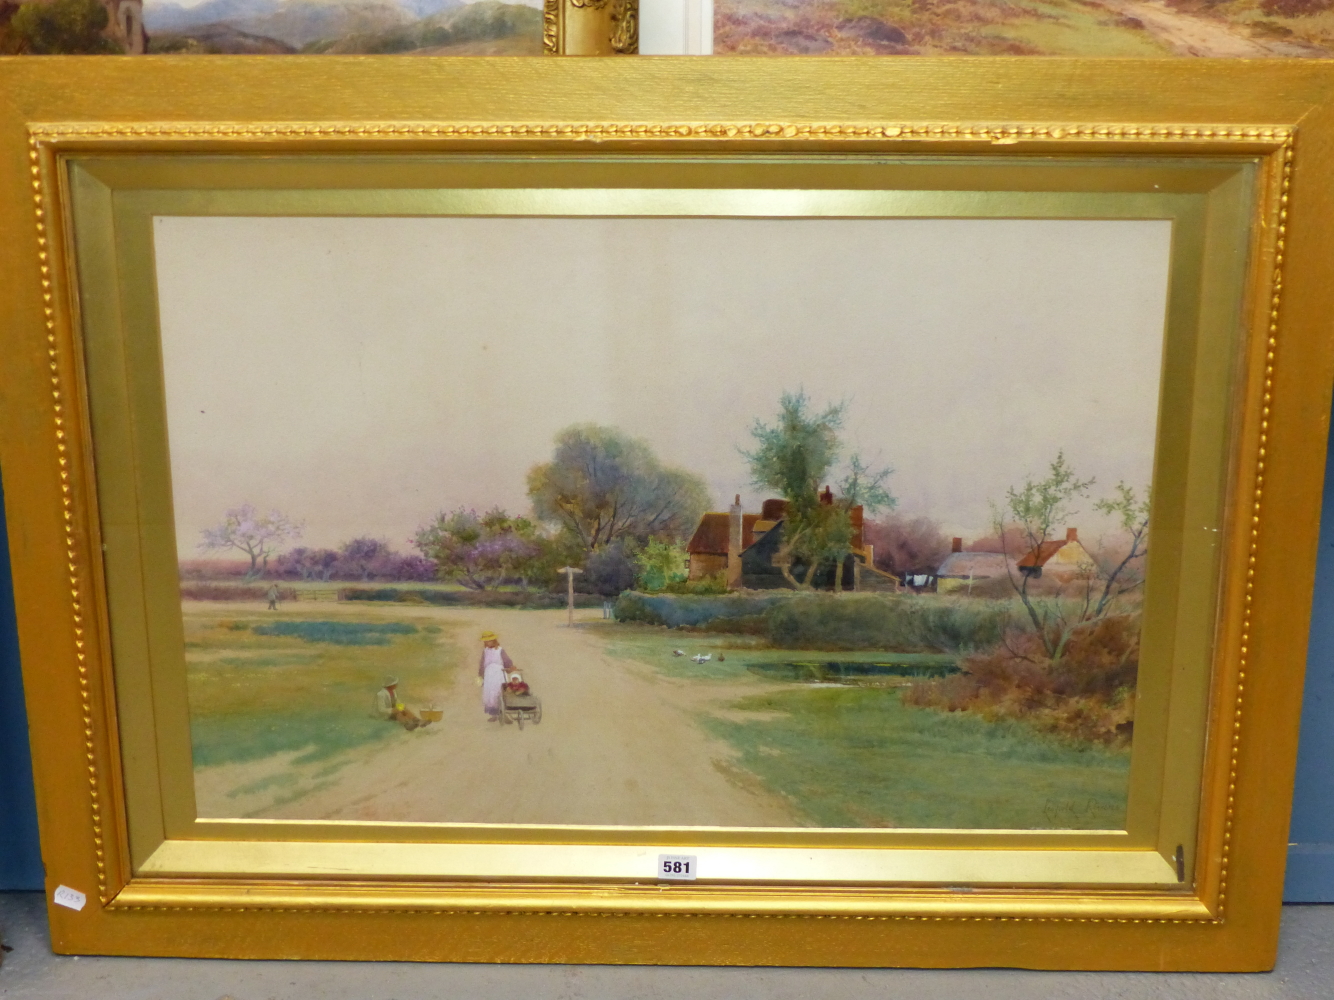 LEOPOLD RIVERS (1852-1905), CHILDREN AND A BABY IN A VILLAGE LANDSCAPE, SIGNED, WATERCOLOUR, 74 x - Image 2 of 4